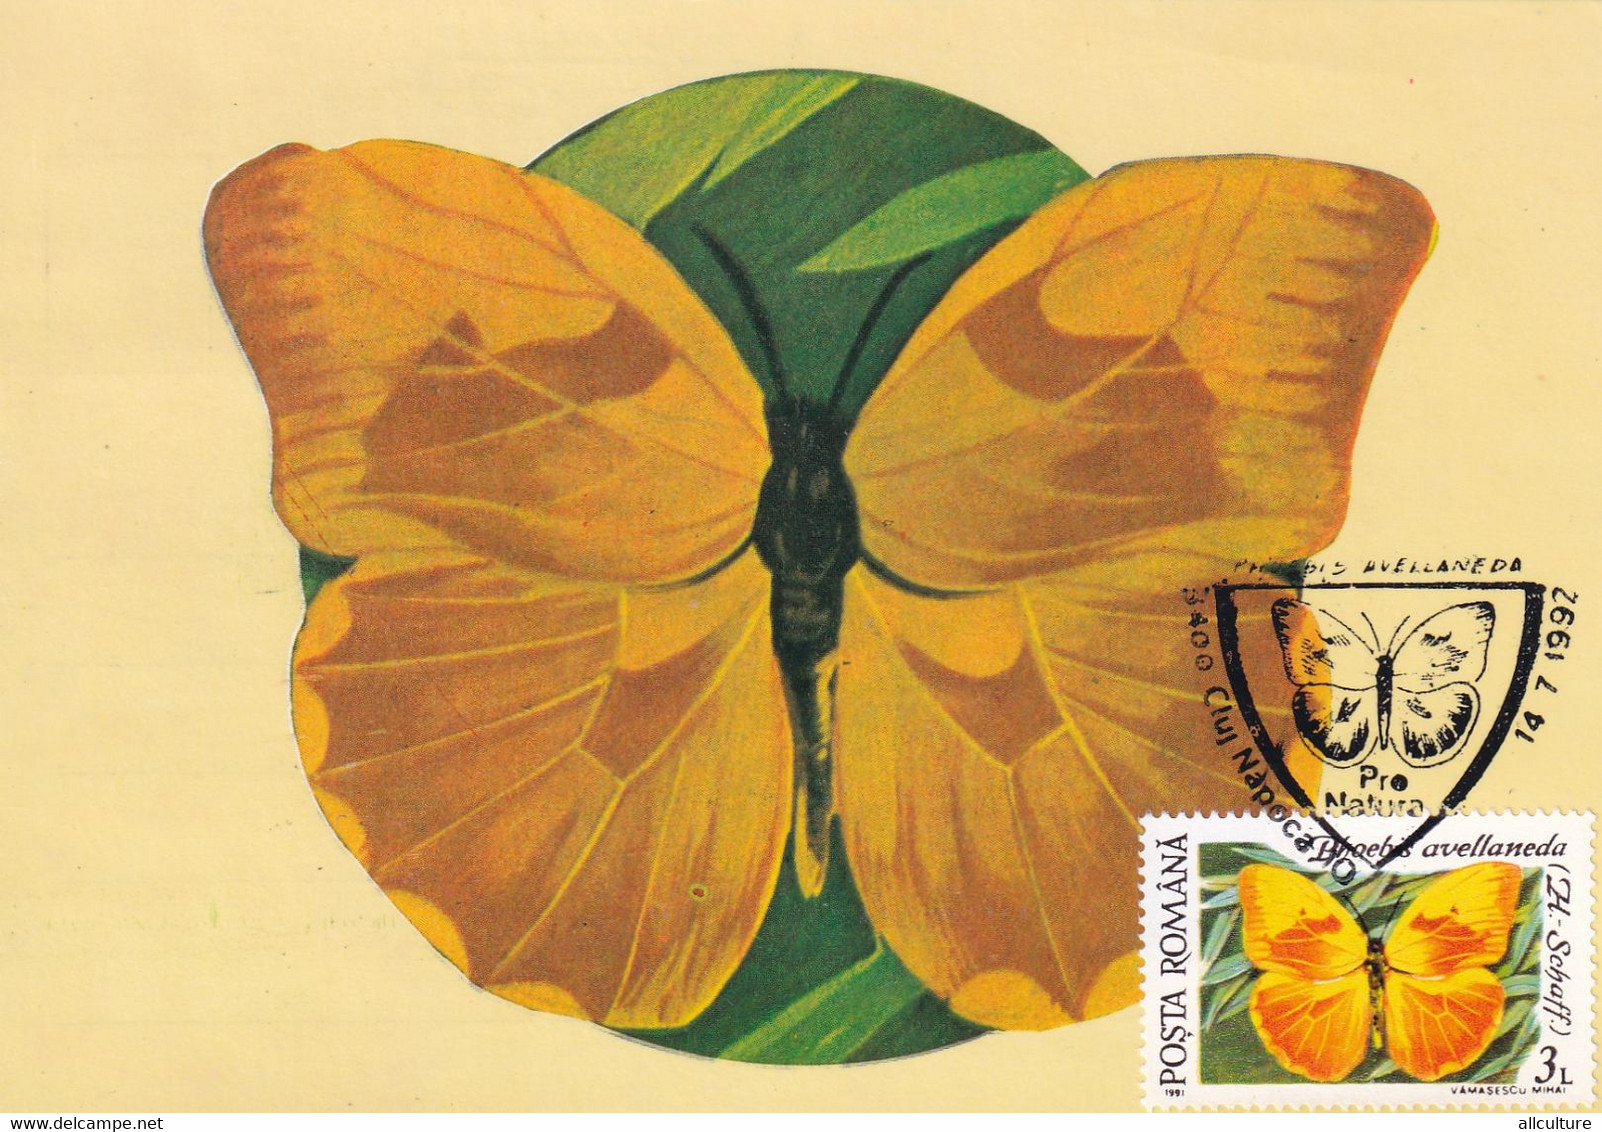 A9041- PHOEBIS AVELLANEDA BUTTERFLY, PRONATURE CLUJ NAPOCA 1992 ROMANIA, MAX CARD USED STAMP ON COVER POSTCARD - Vlinders